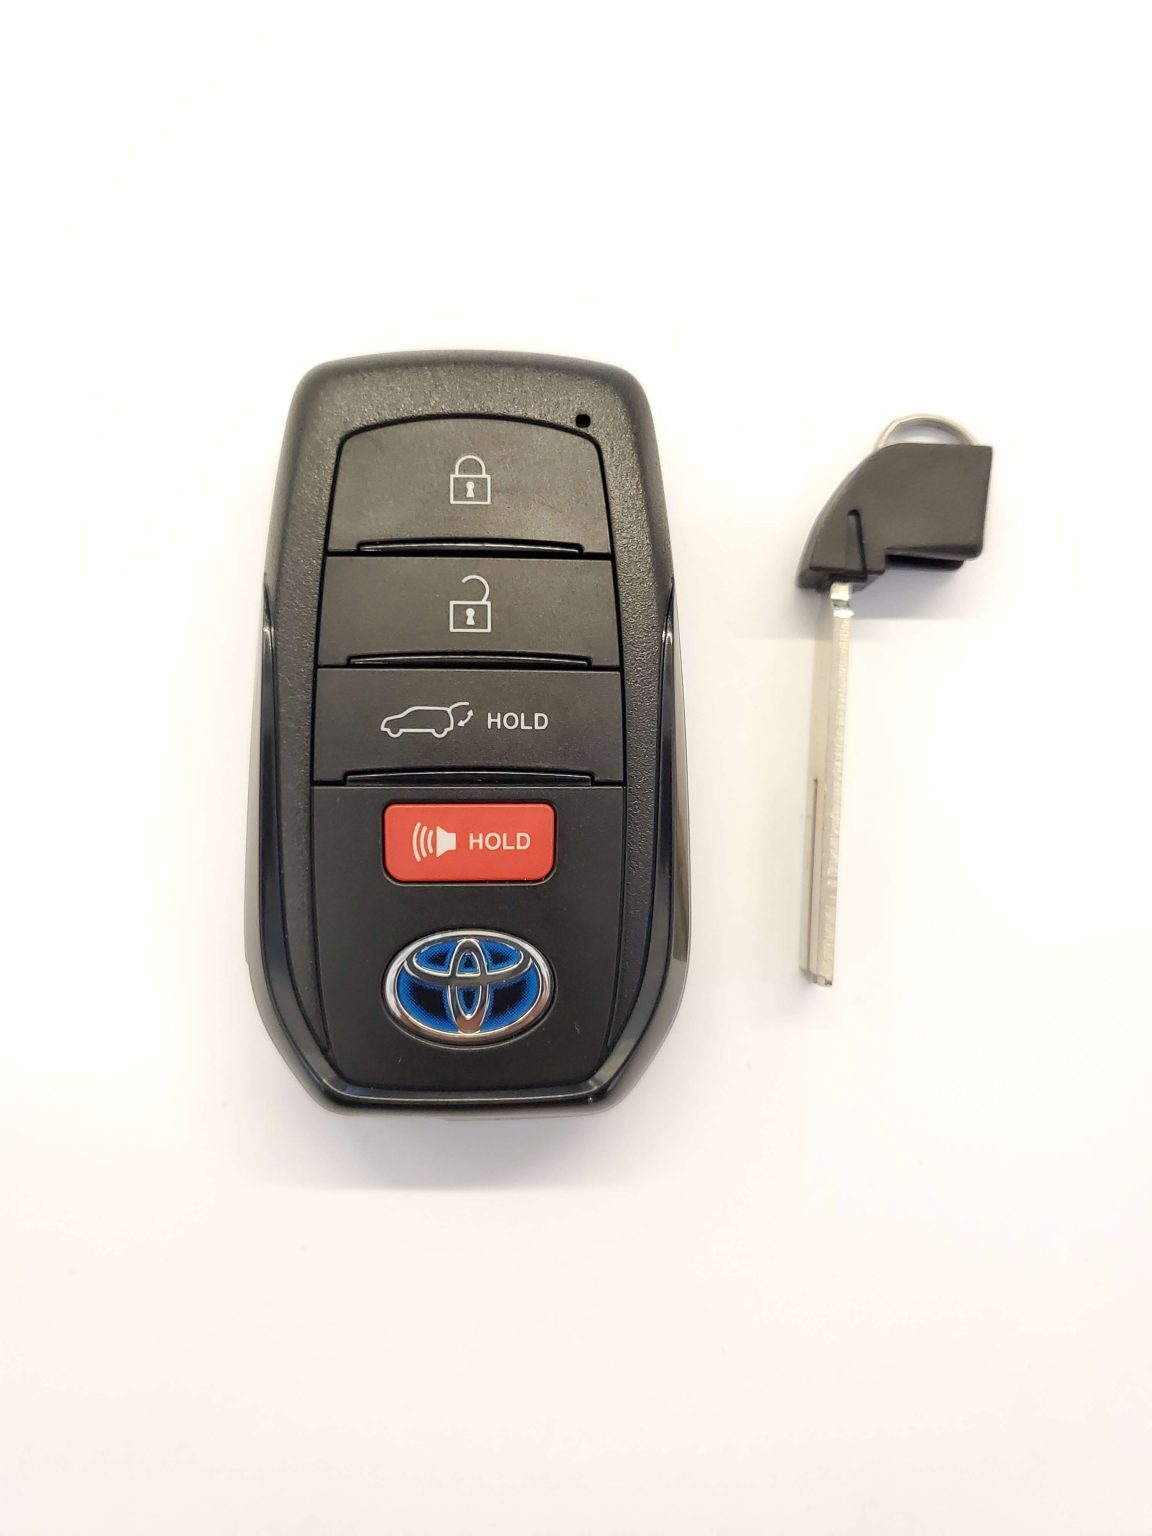 Toyota Keys Replacement What To Do, Options, Costs, Tips & More